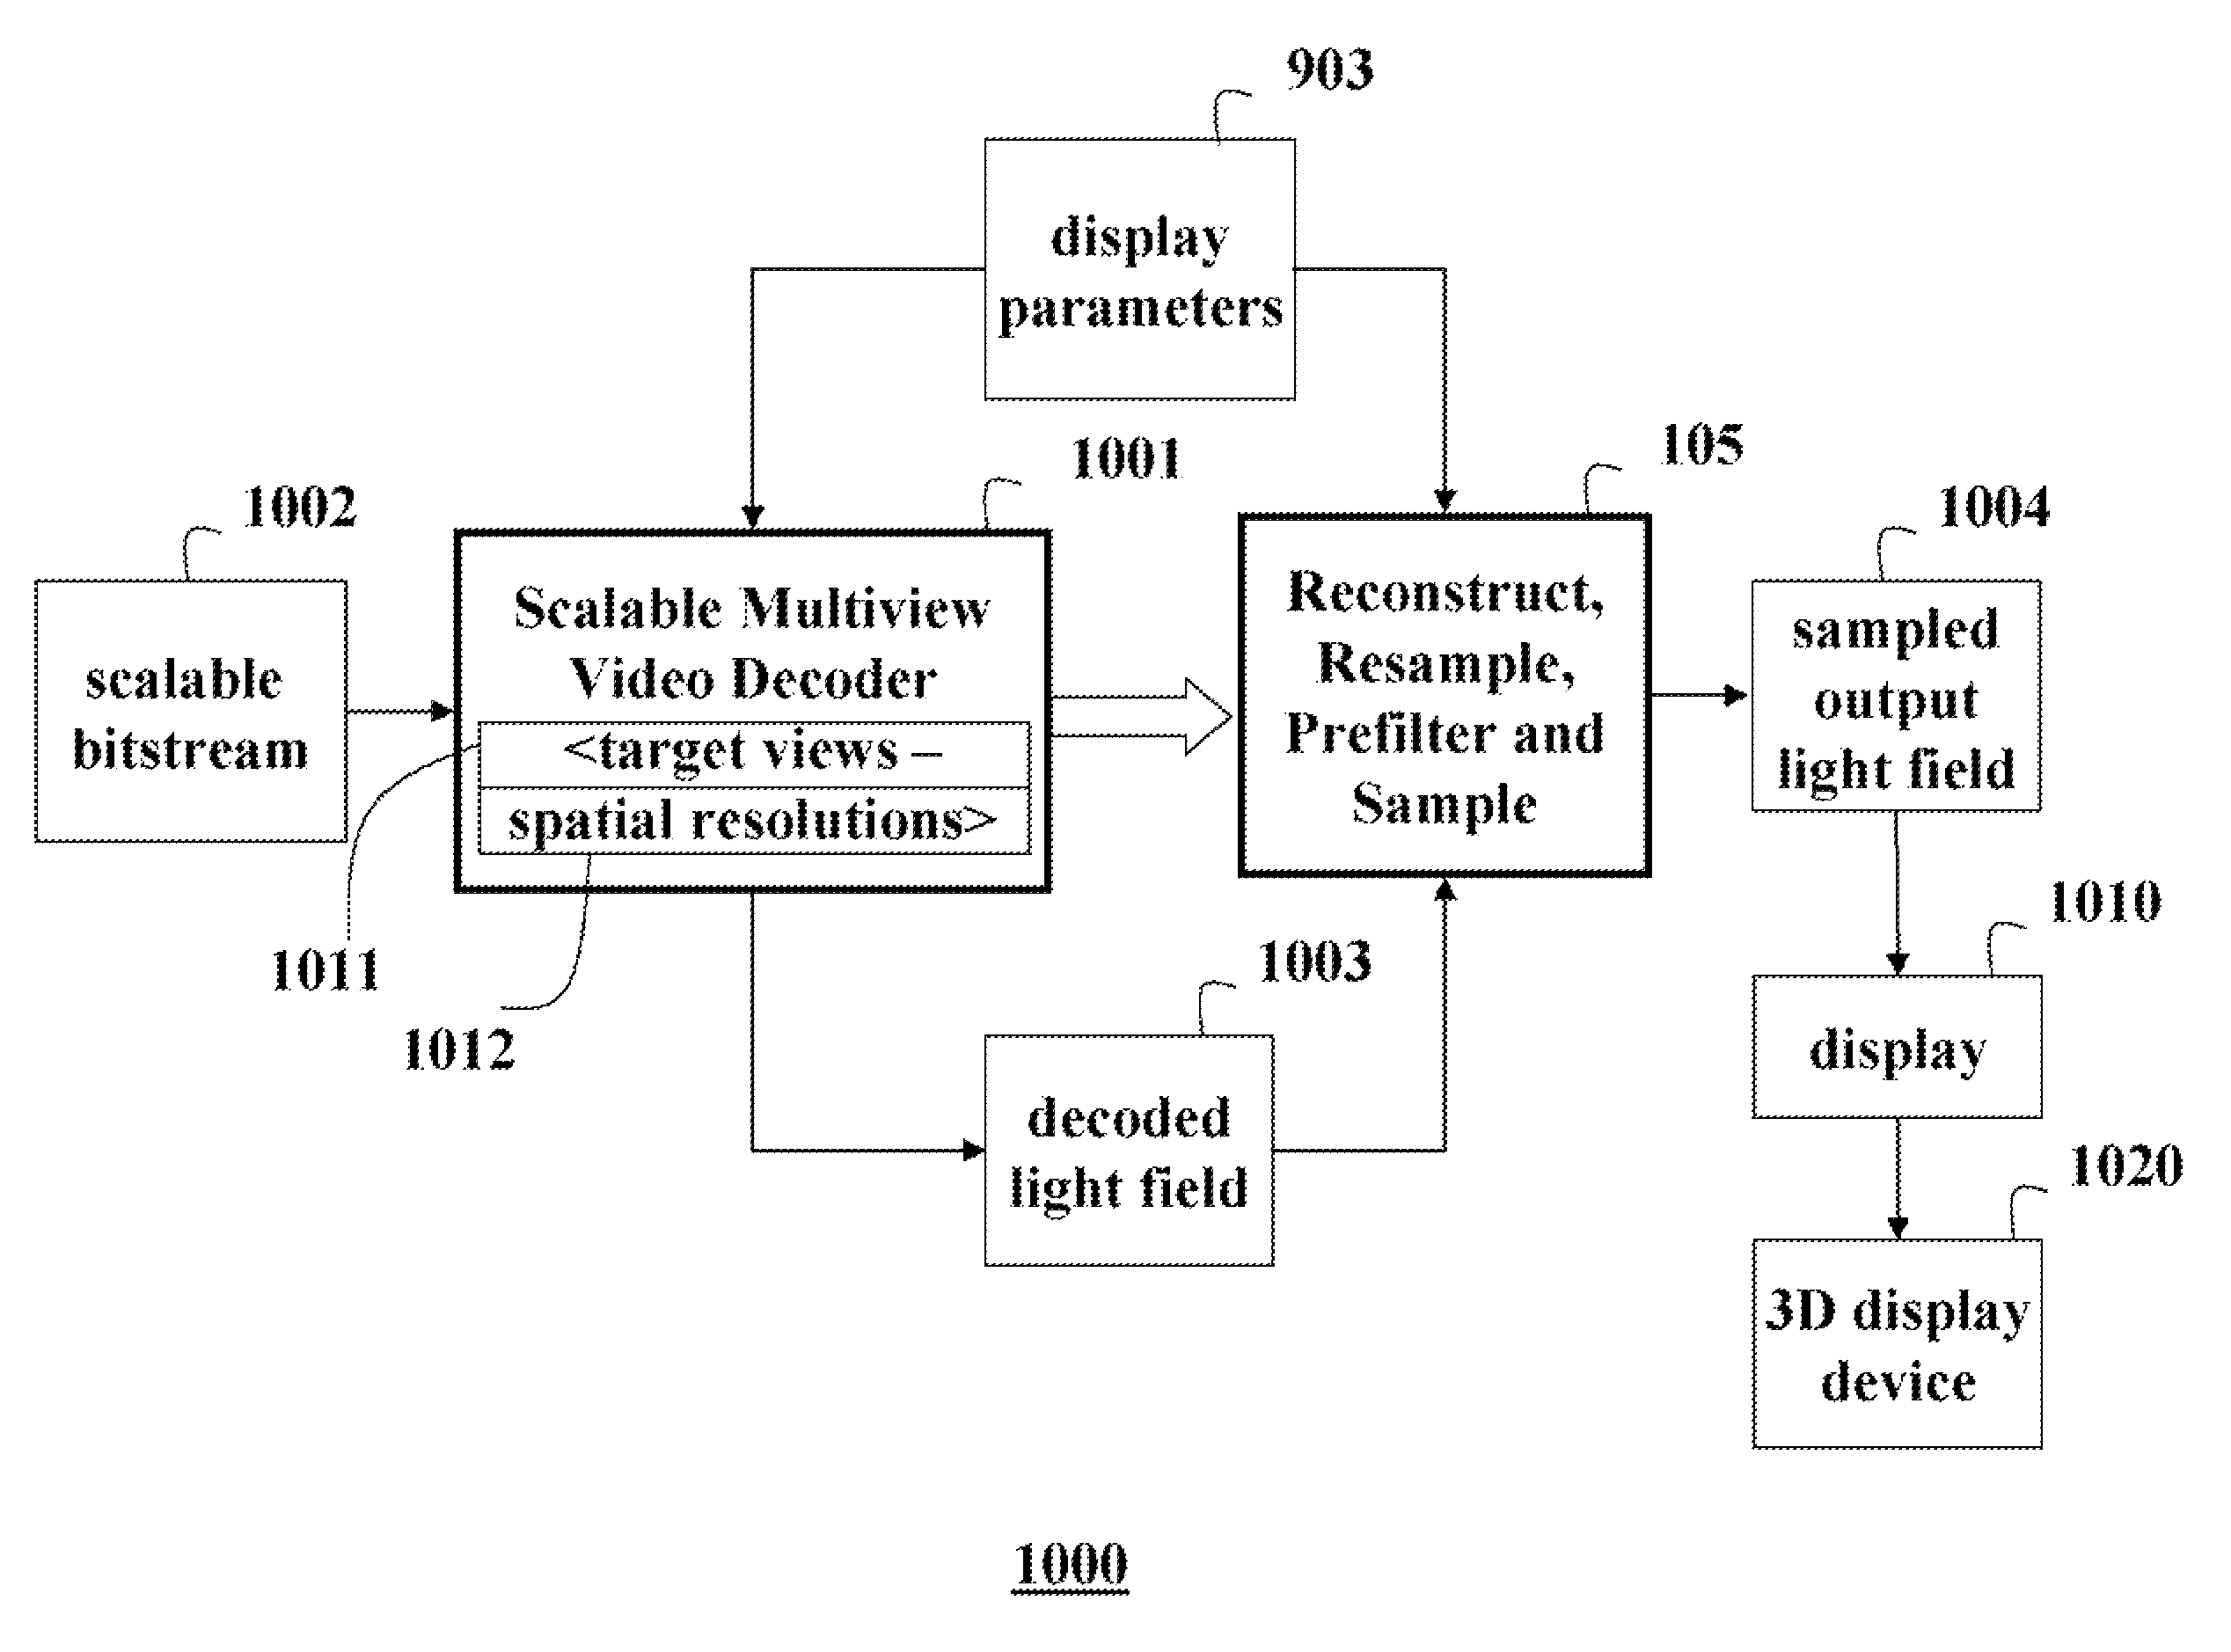 Method and system for decoding and displaying 3D light fields